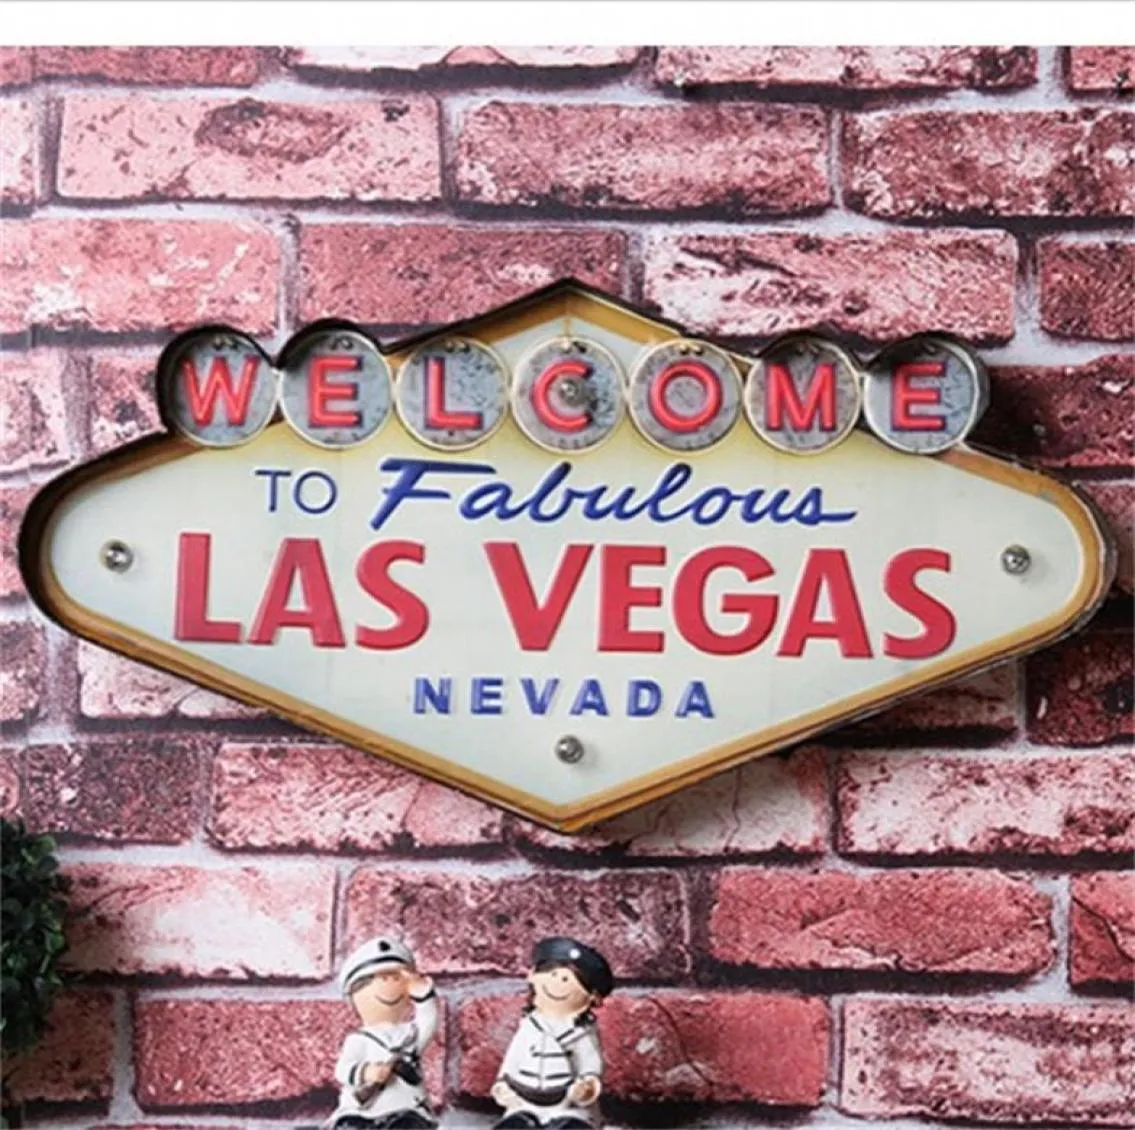 Whole Las Vegas Decoration Metal Painting Neon Welcome Signs Led Bar Wall Decoration 707 K23402704